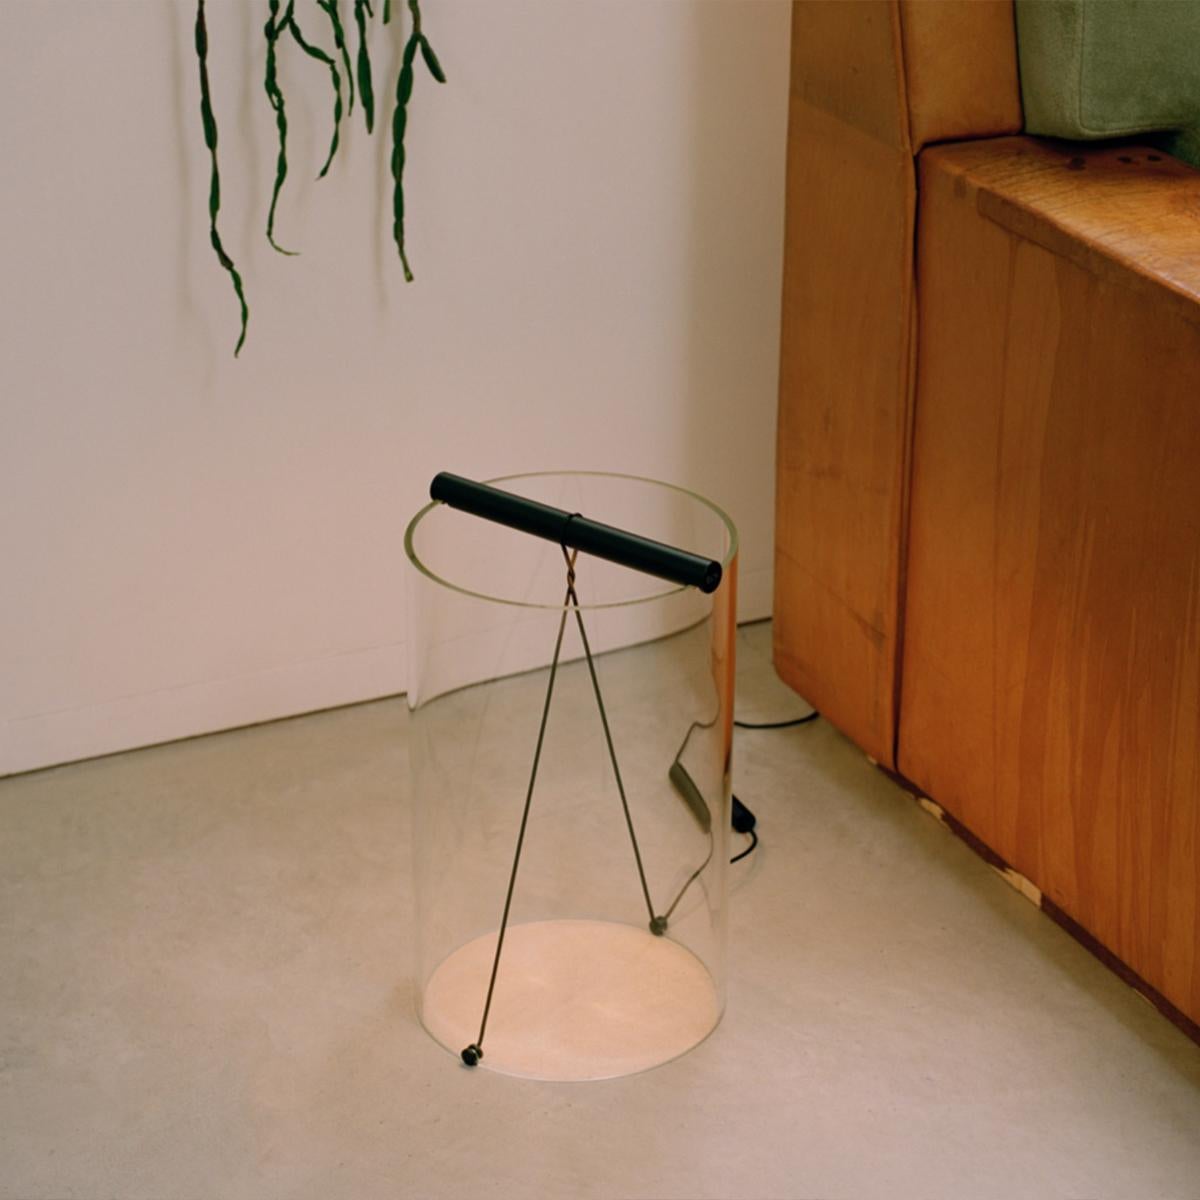 Flos To-Tie T3 Table Lamp in Anodized Black by Guglielmo Poletti In New Condition For Sale In Brooklyn, NY